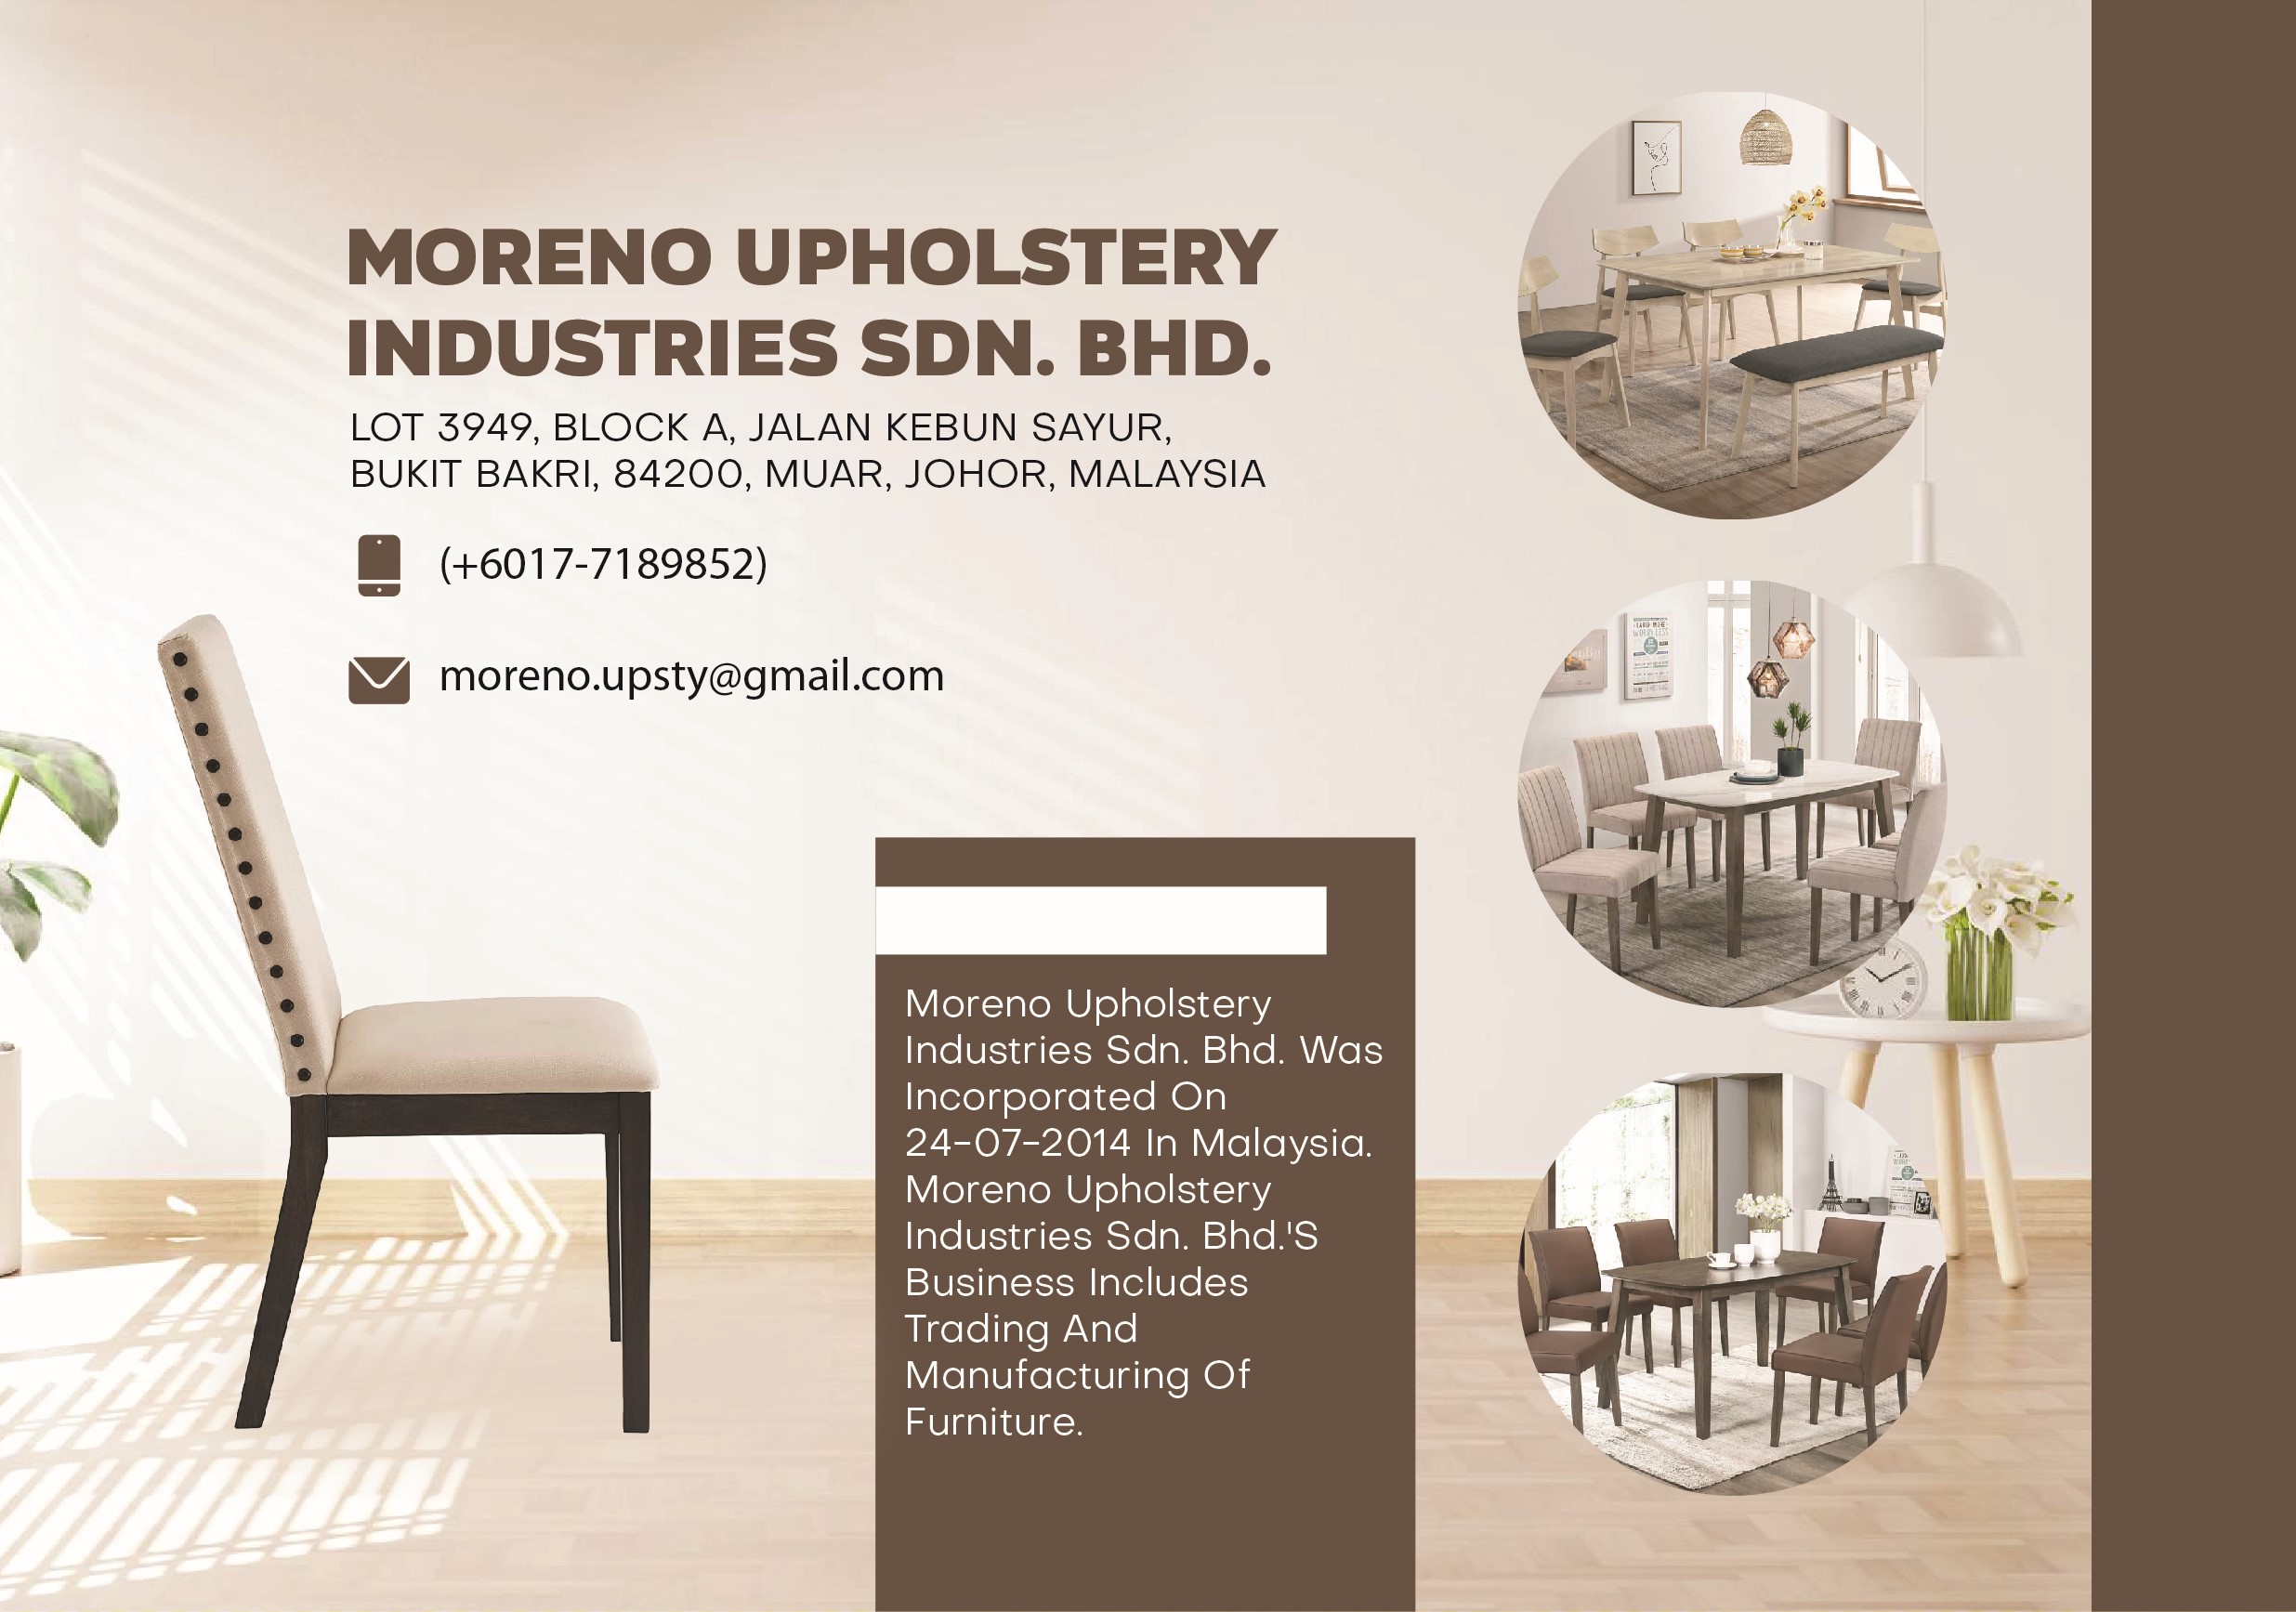 MORENO UPHOLSTERY INDUSTRIES SDN. BHD.